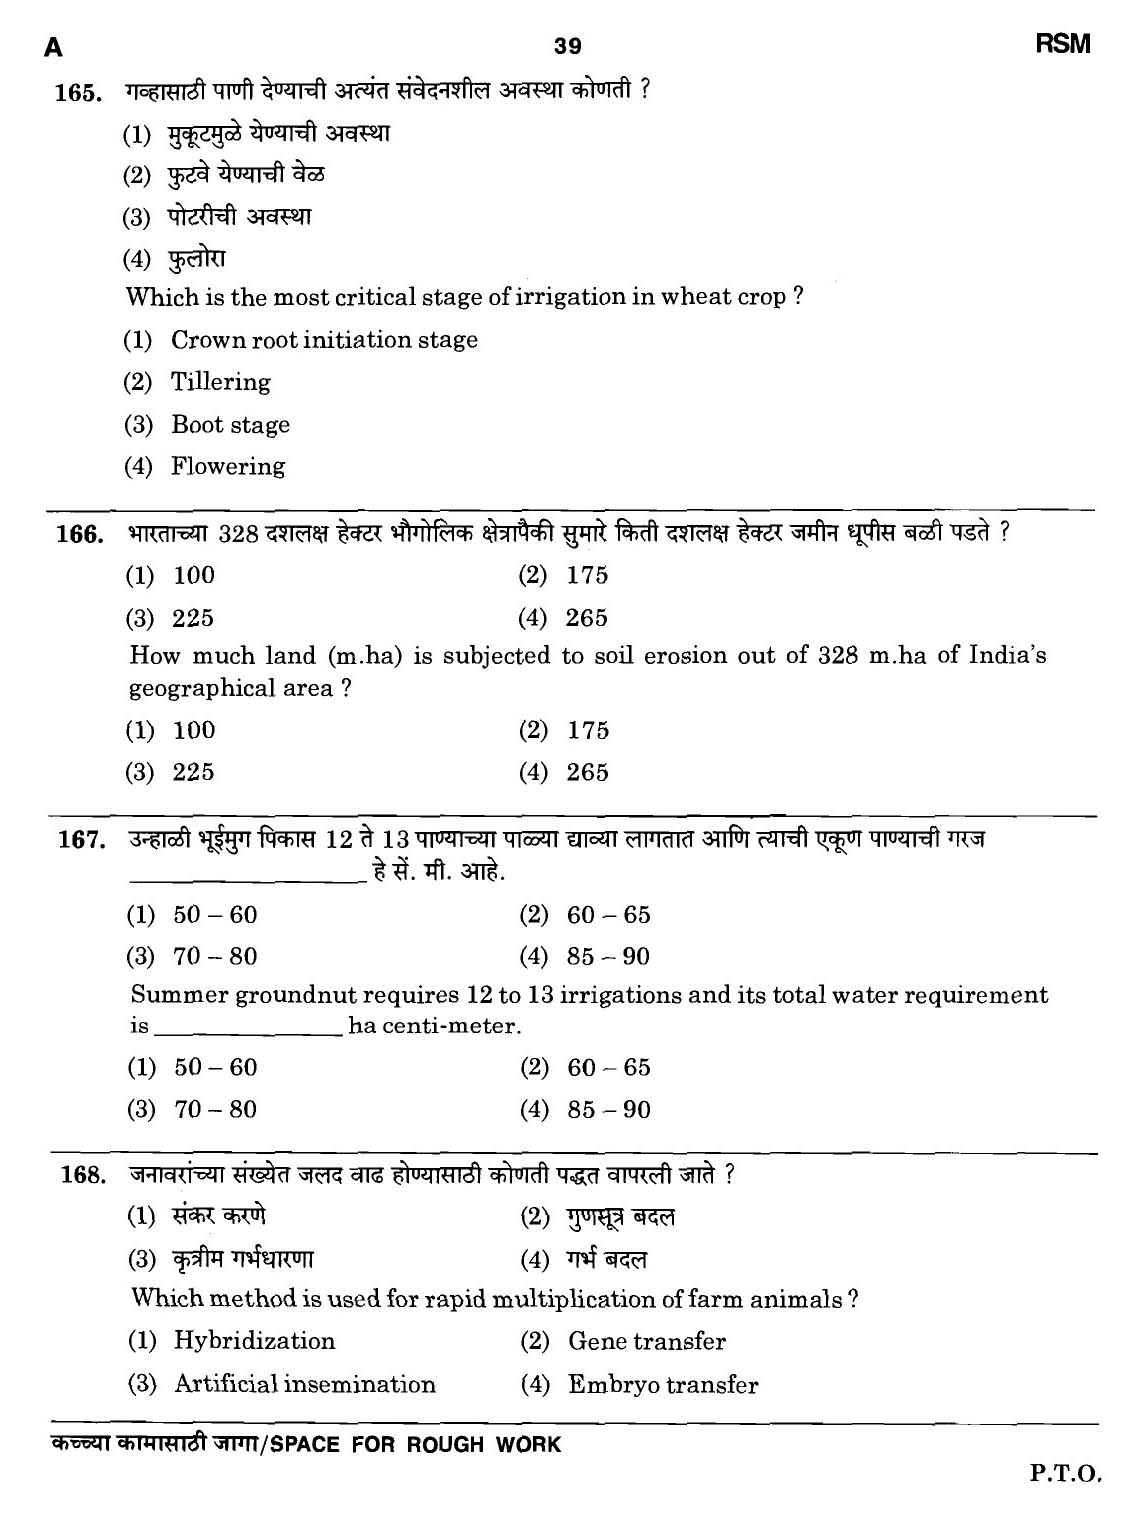 MPSC Agricultural Services Preliminary Exam 2011 Question Paper 38